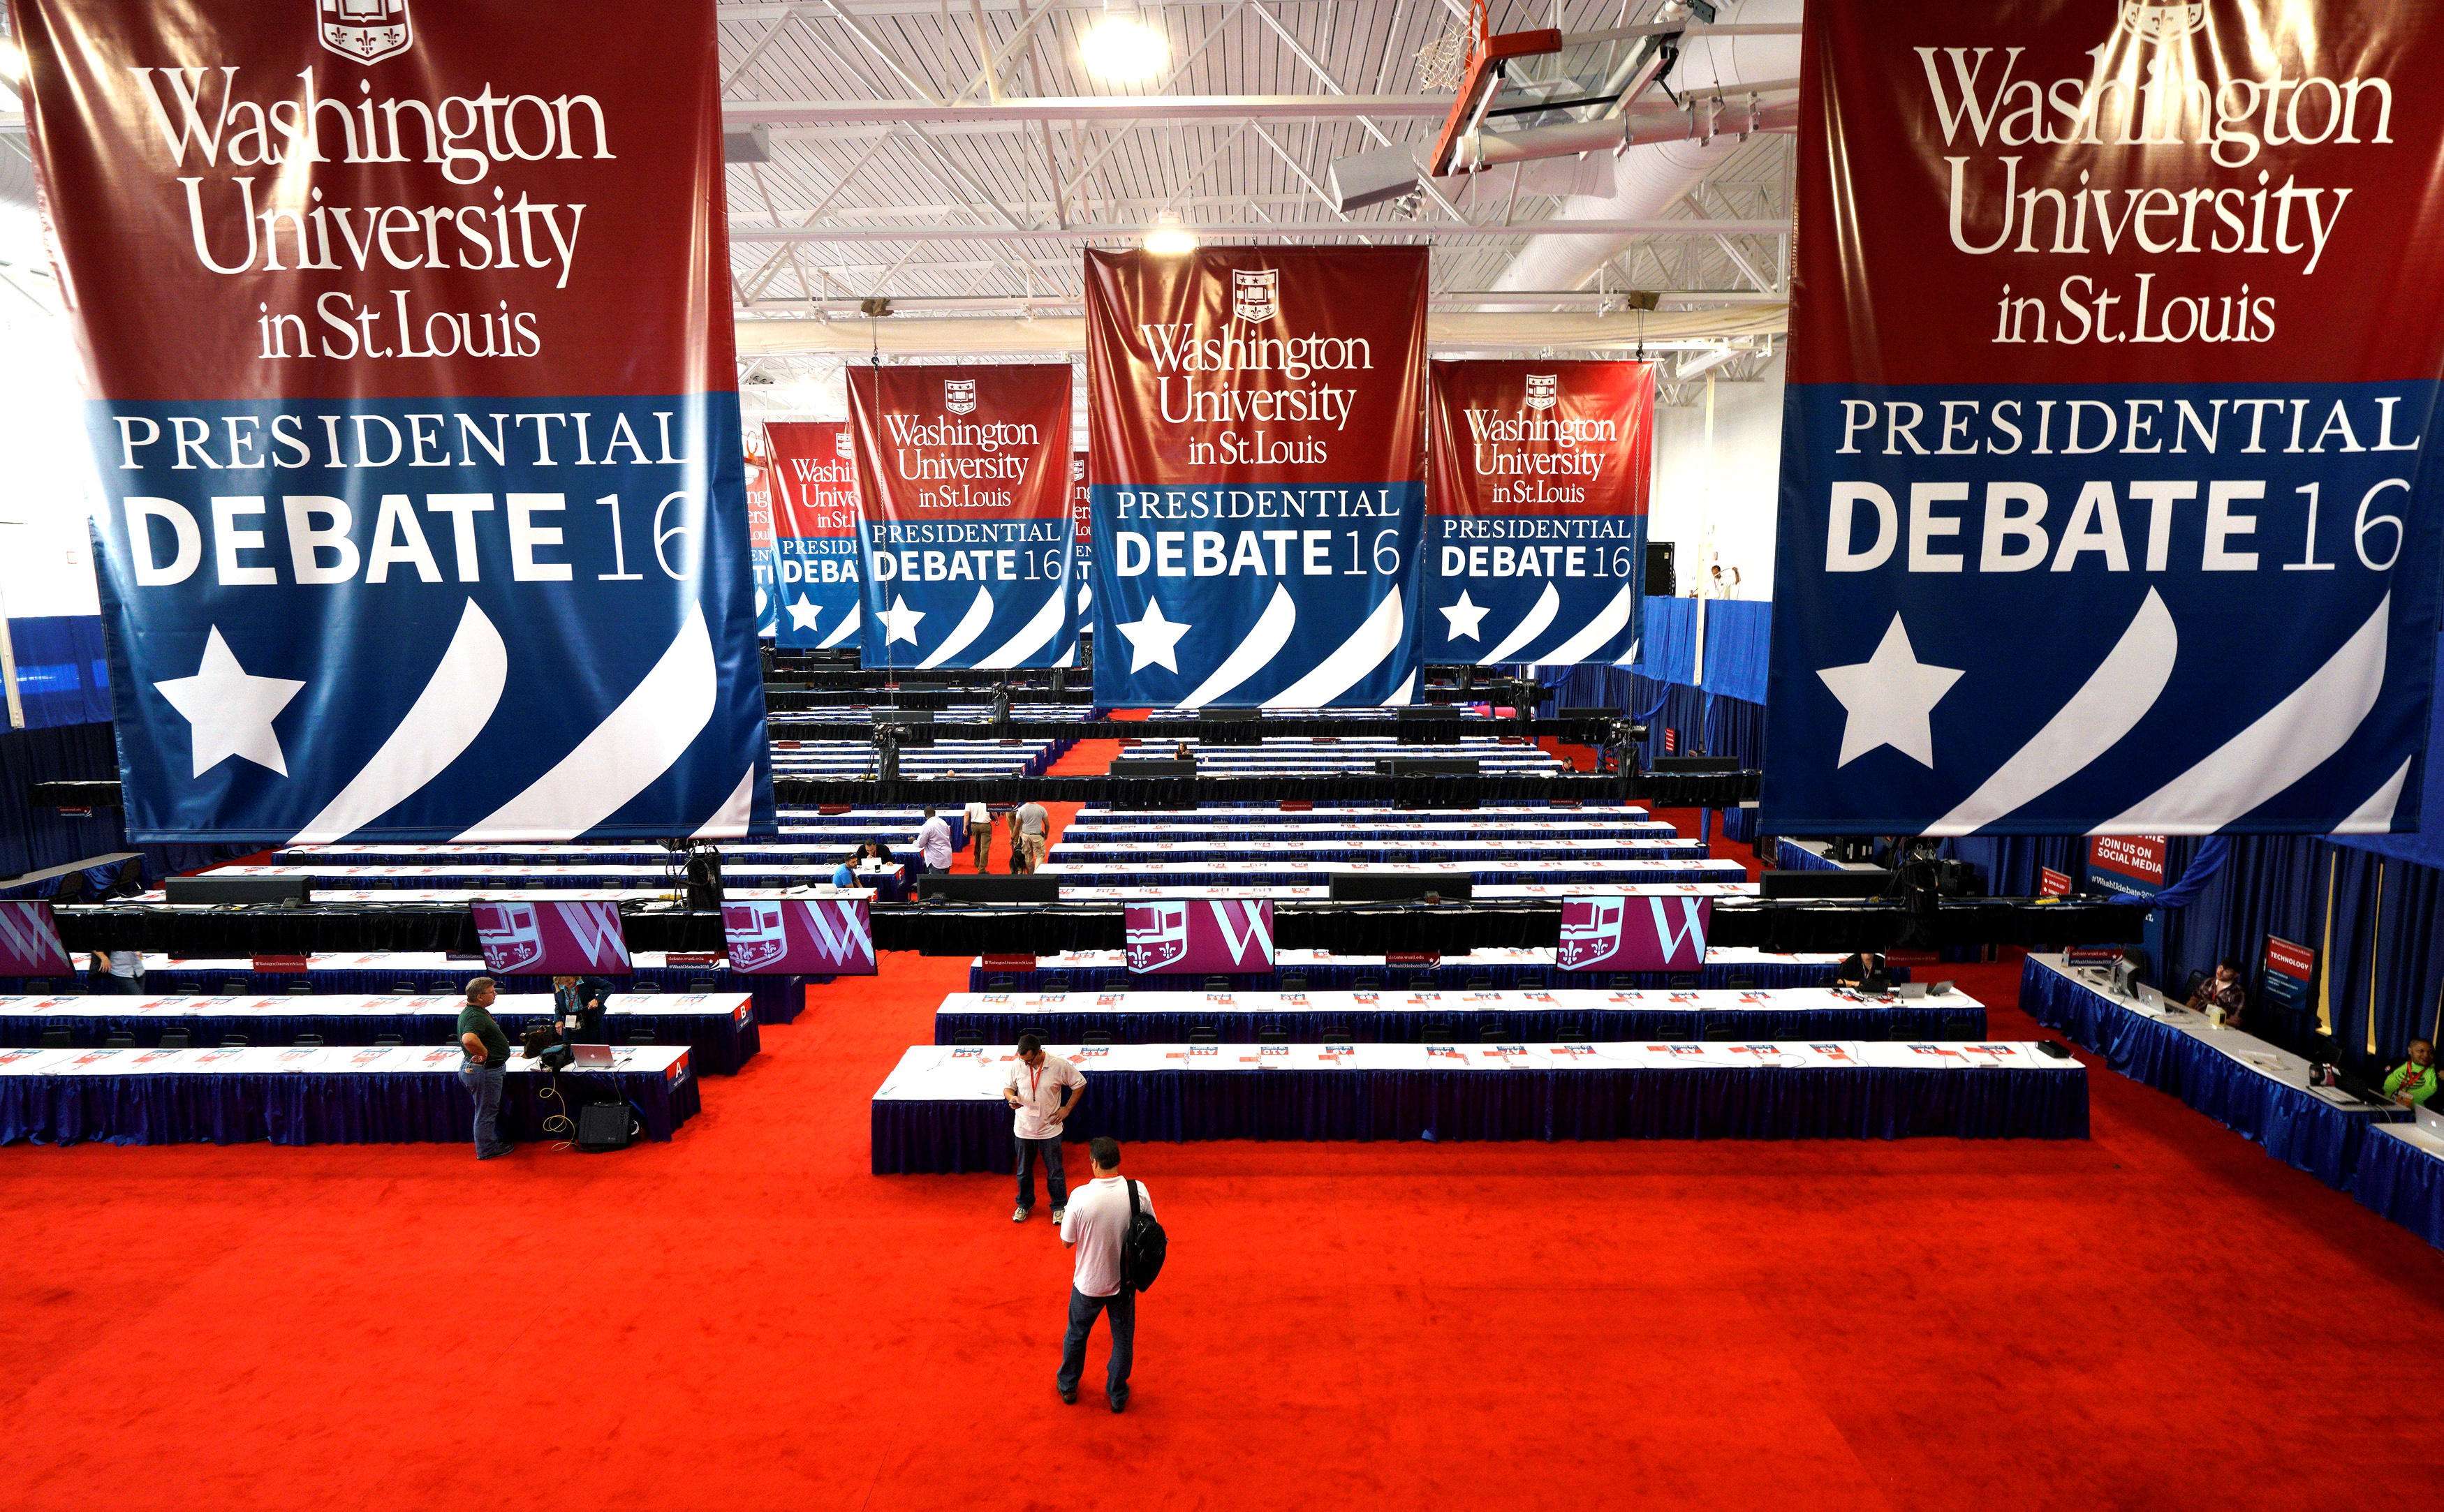 Second presidential debate 2016: What time, how to watch and live stream online - CBS News3500 x 2166